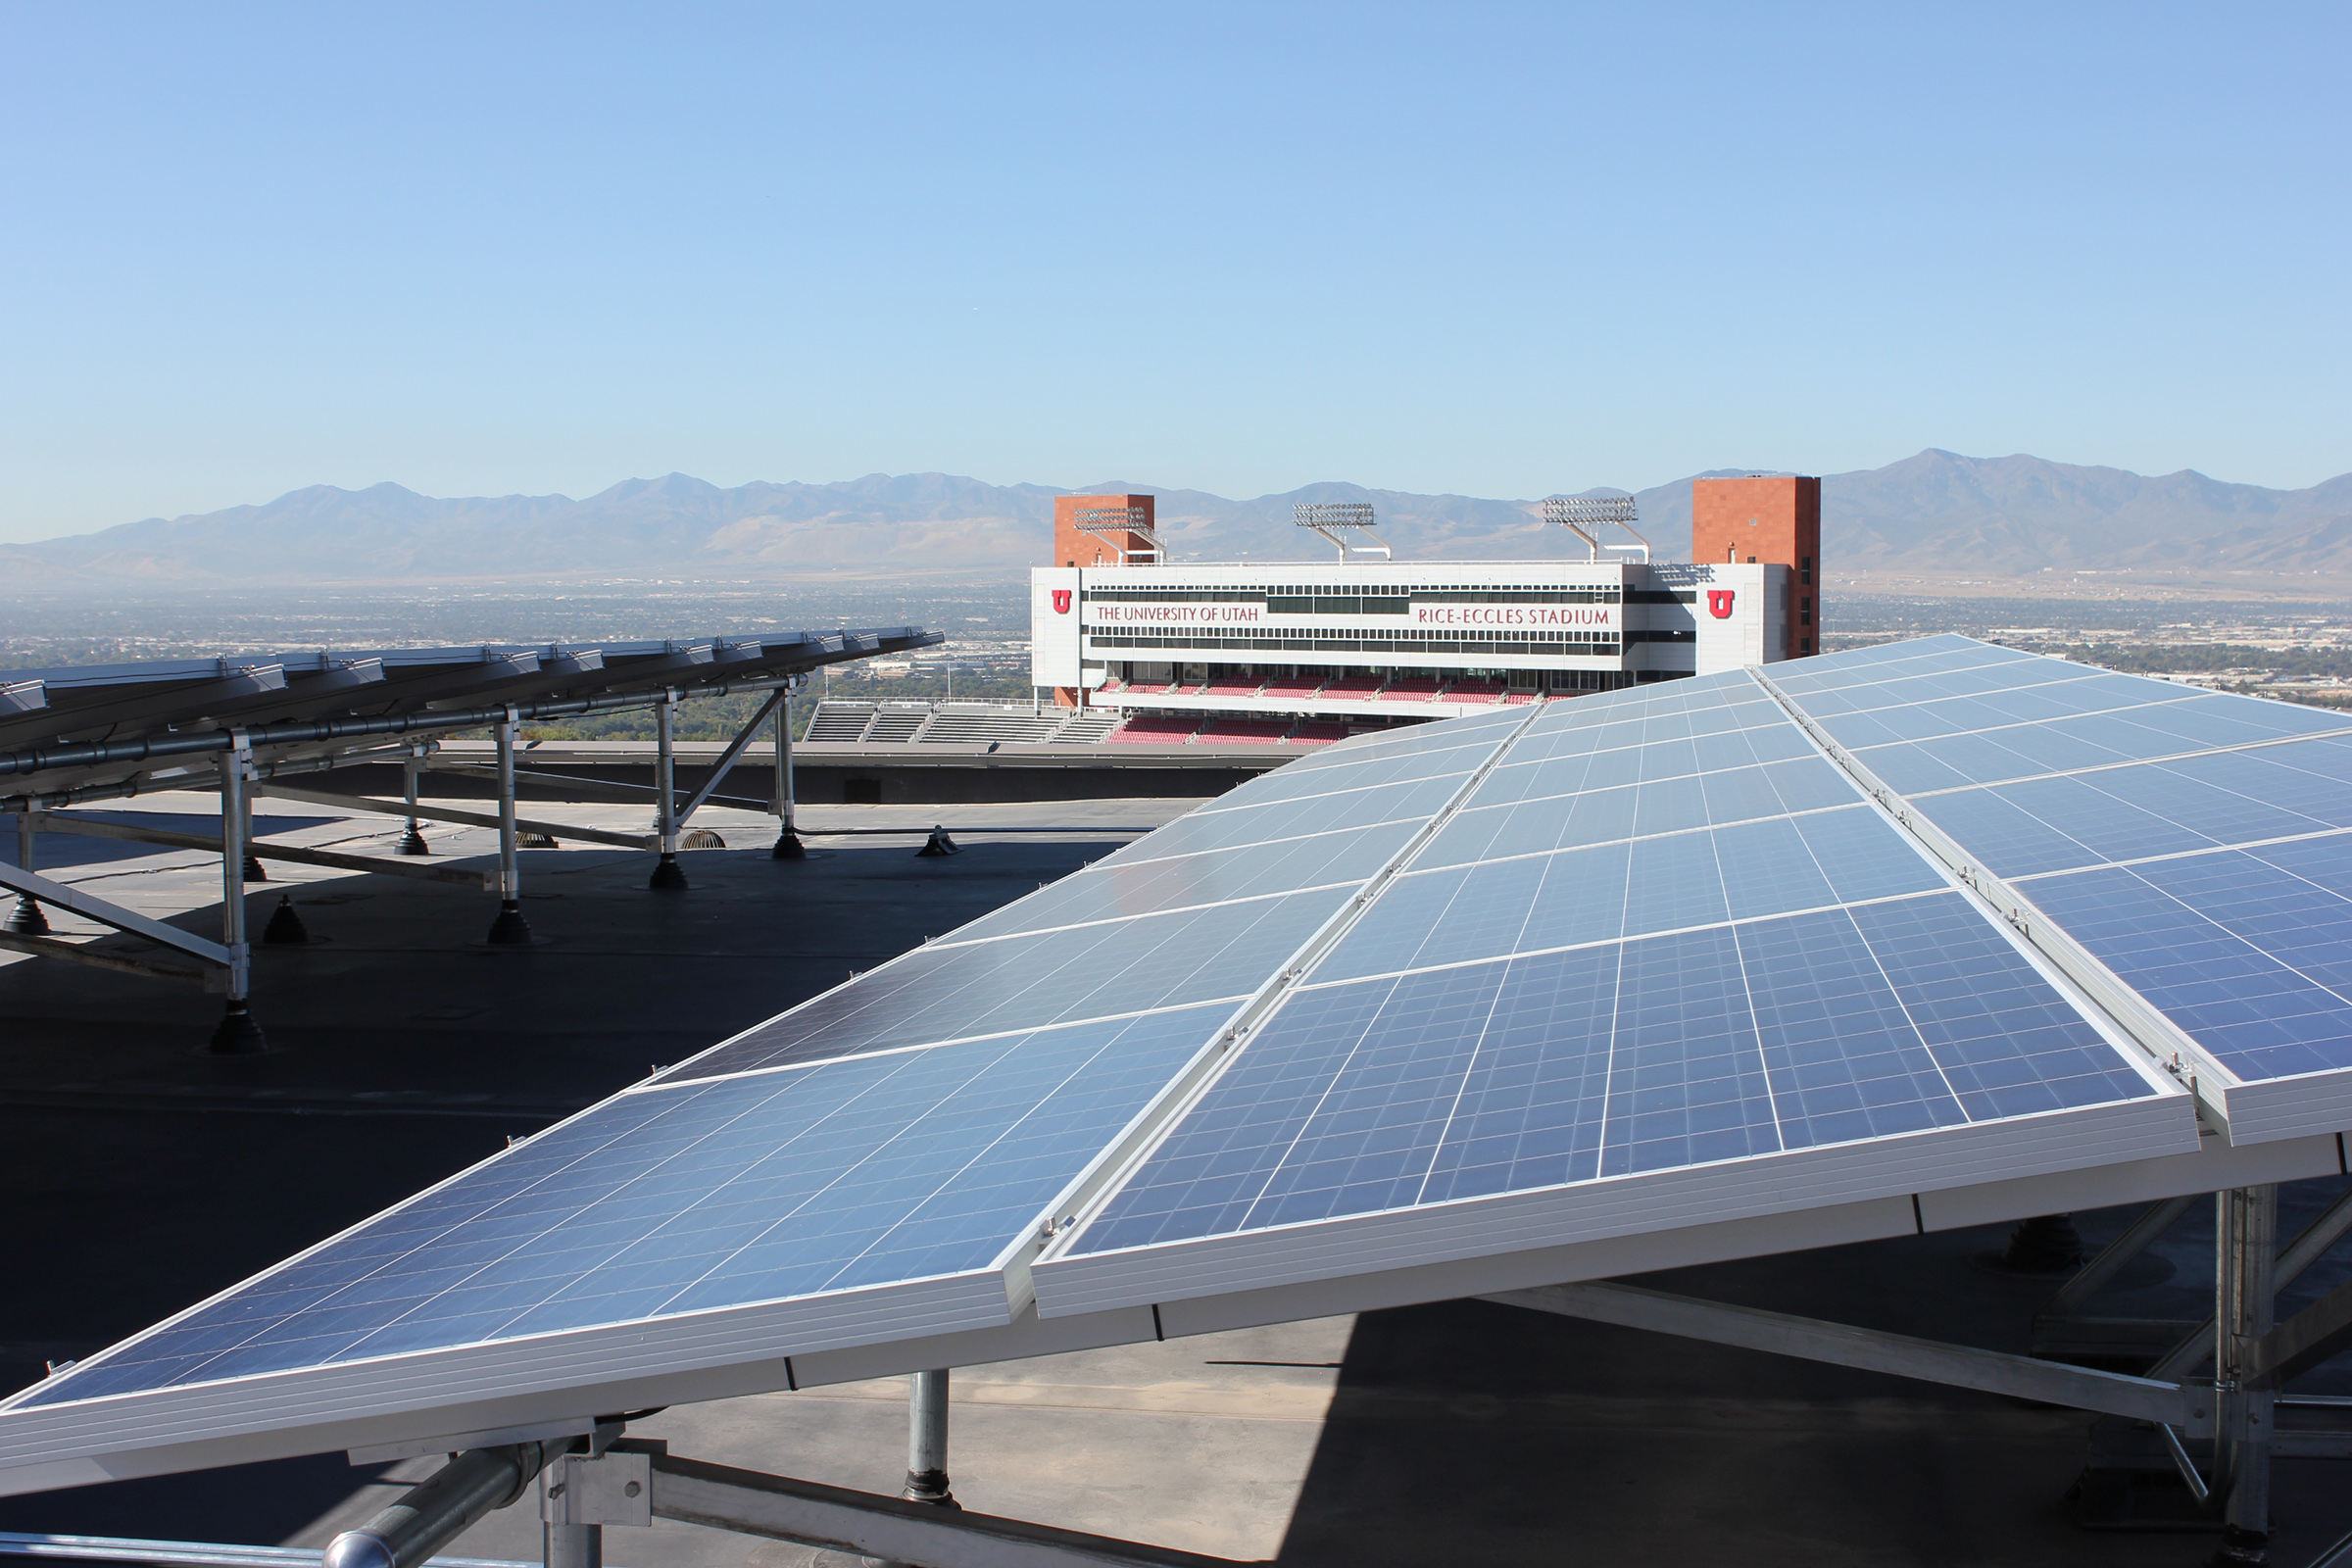 Two of the solar arrays on the west penthouse of the J. Willard Marriott Library, University of Utah.